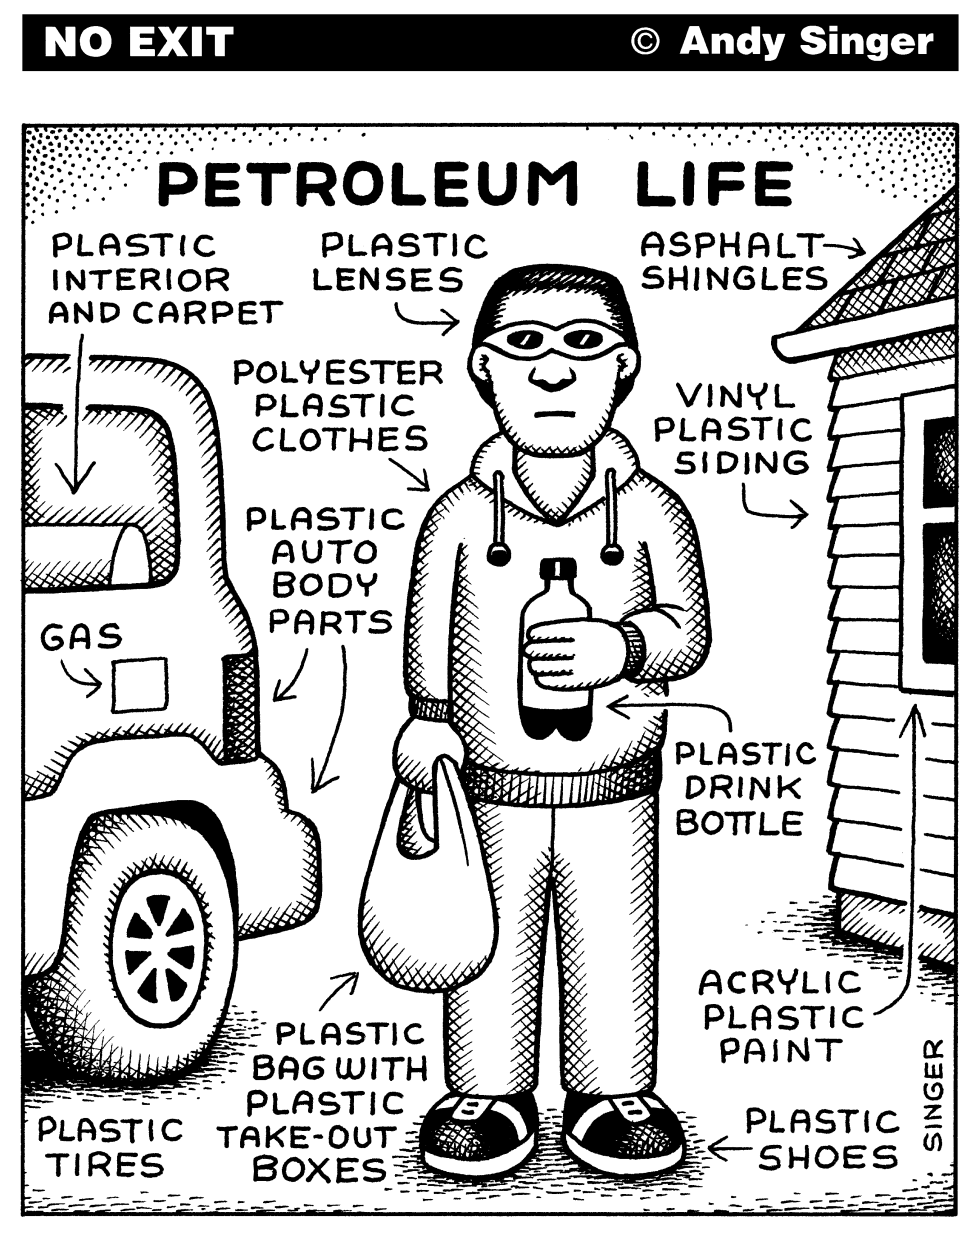 PETROLEUM LIFE by Andy Singer